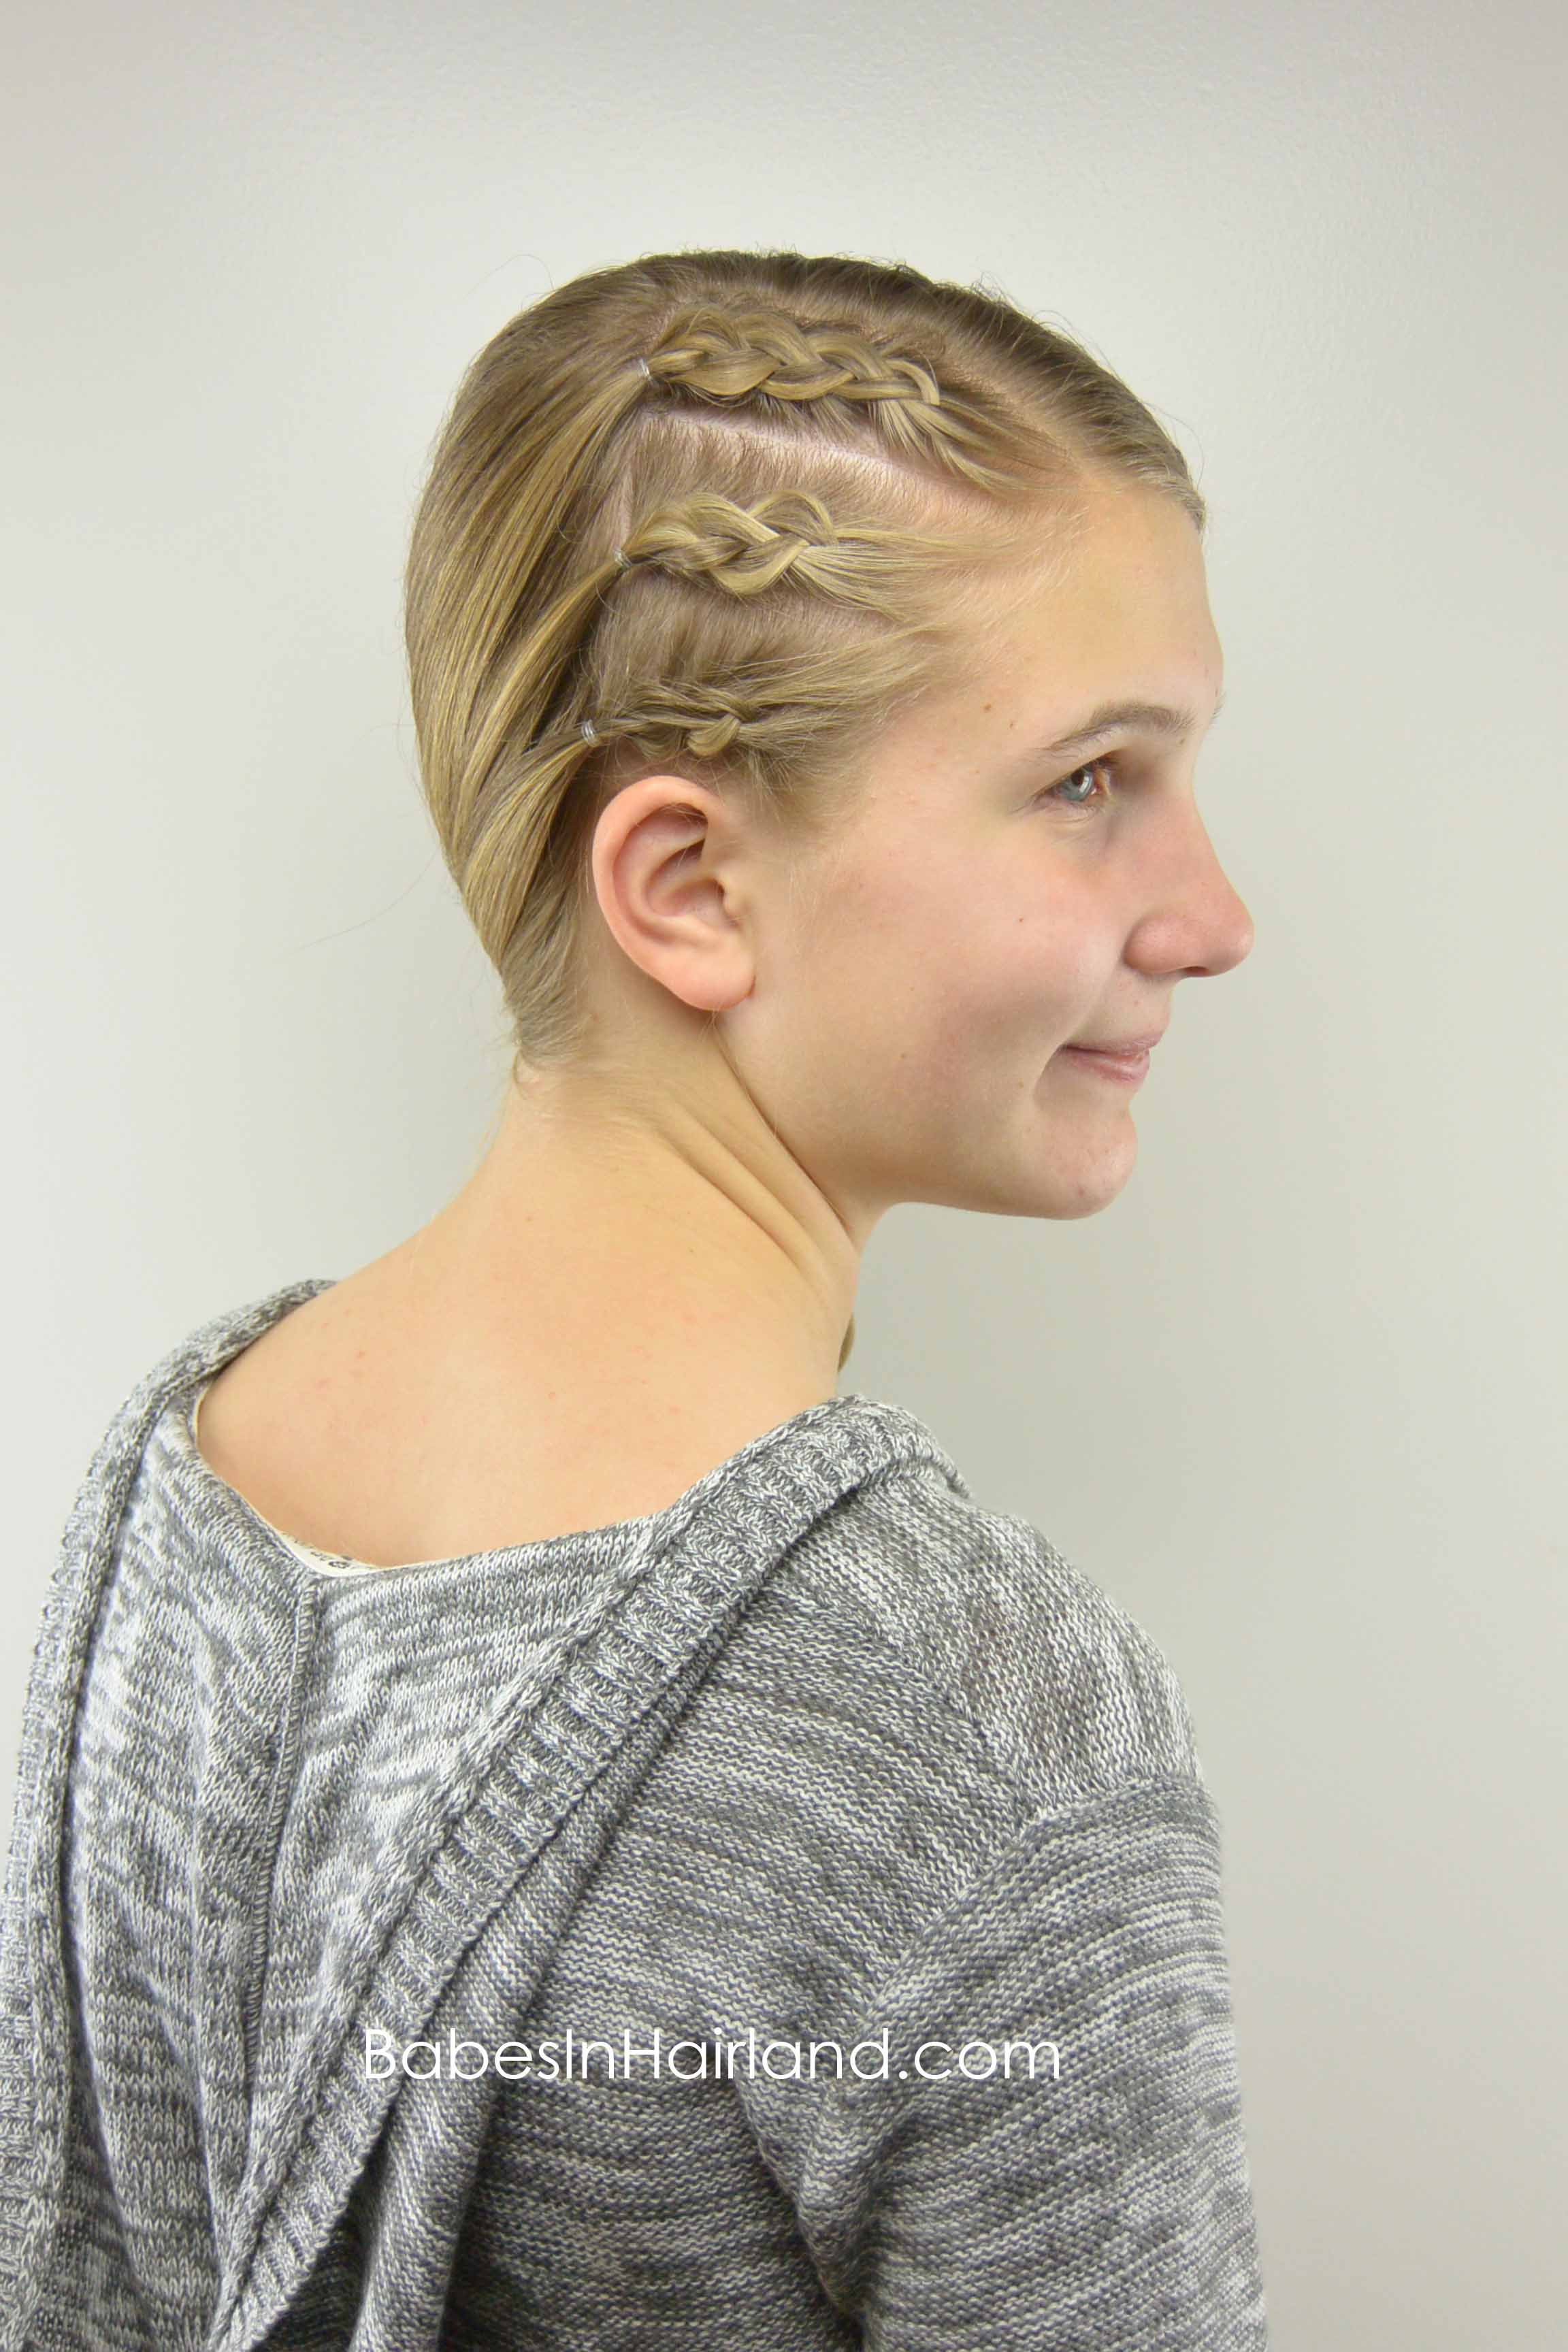 Easy And Edgy Braided Style For Teens From Braids